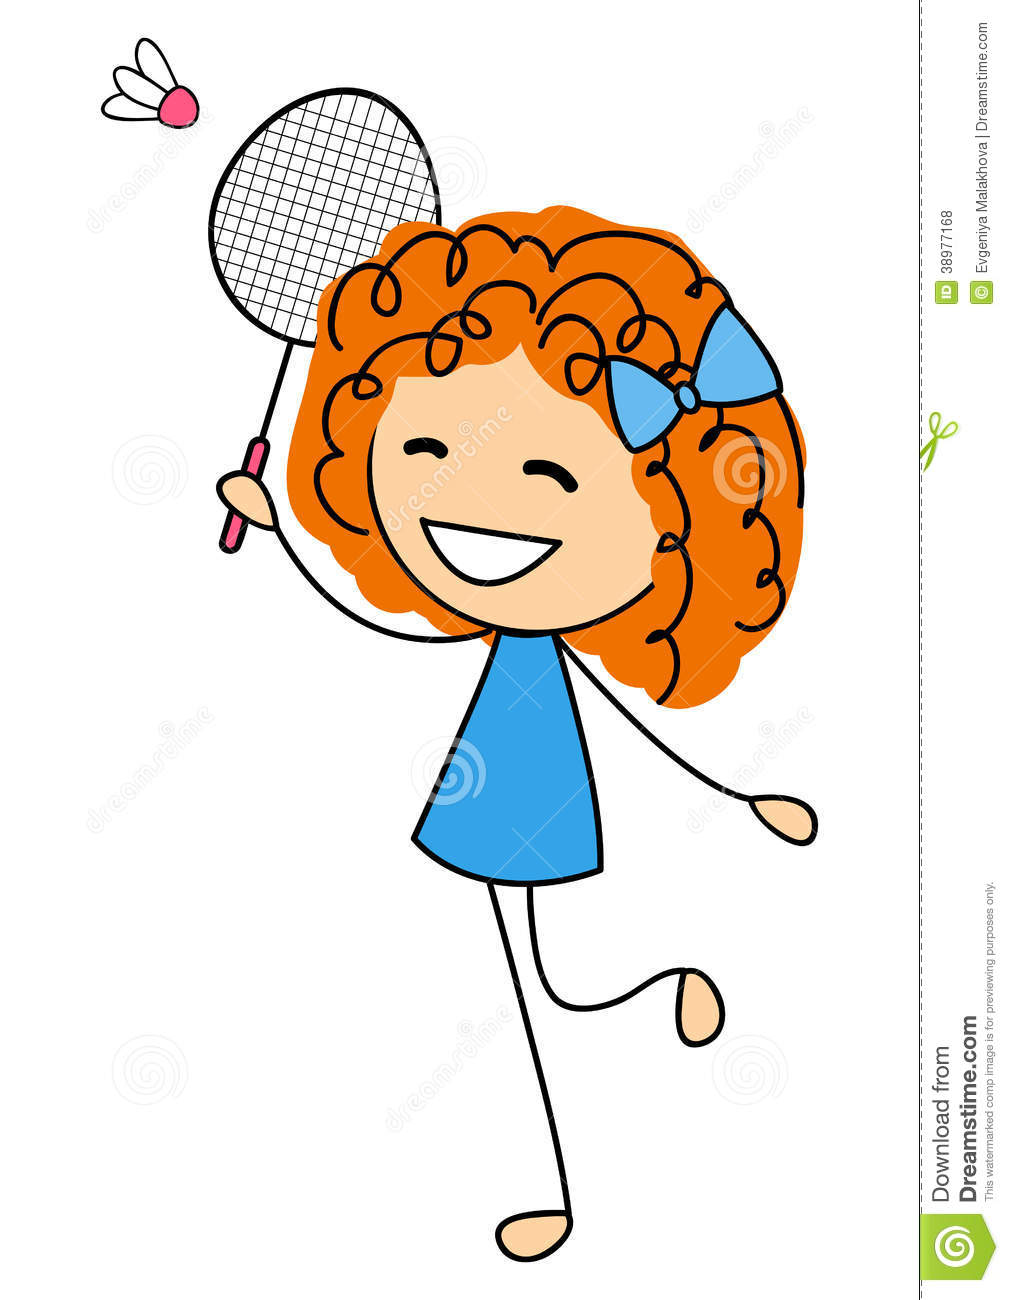 Girl pencil and in. Badminton clipart illustration